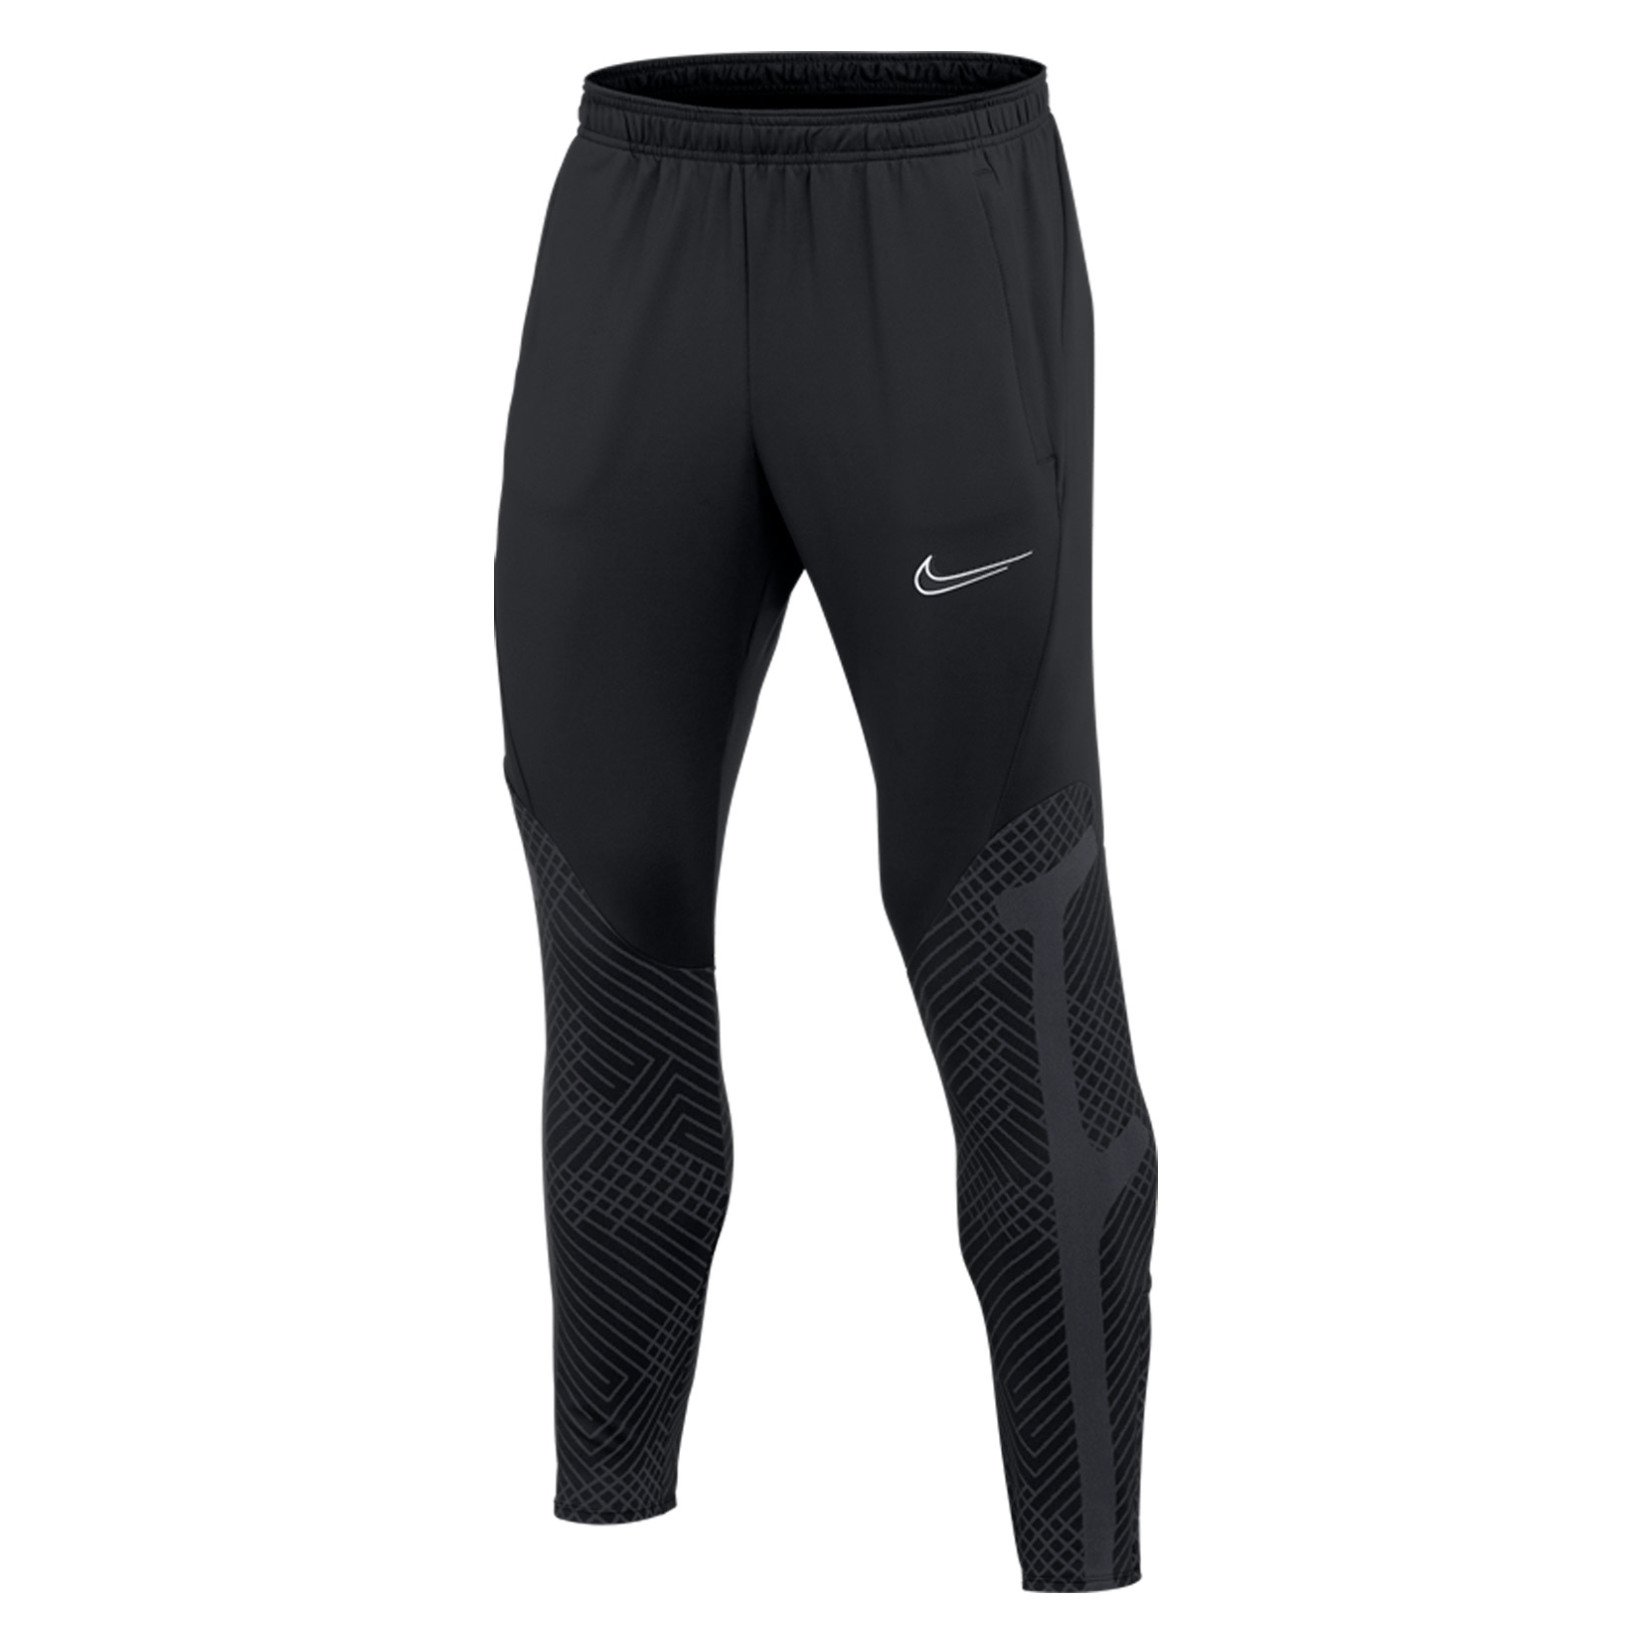 Nike Pro Hyperwarm Tights, Pants & Capris, Clothing & Accessories